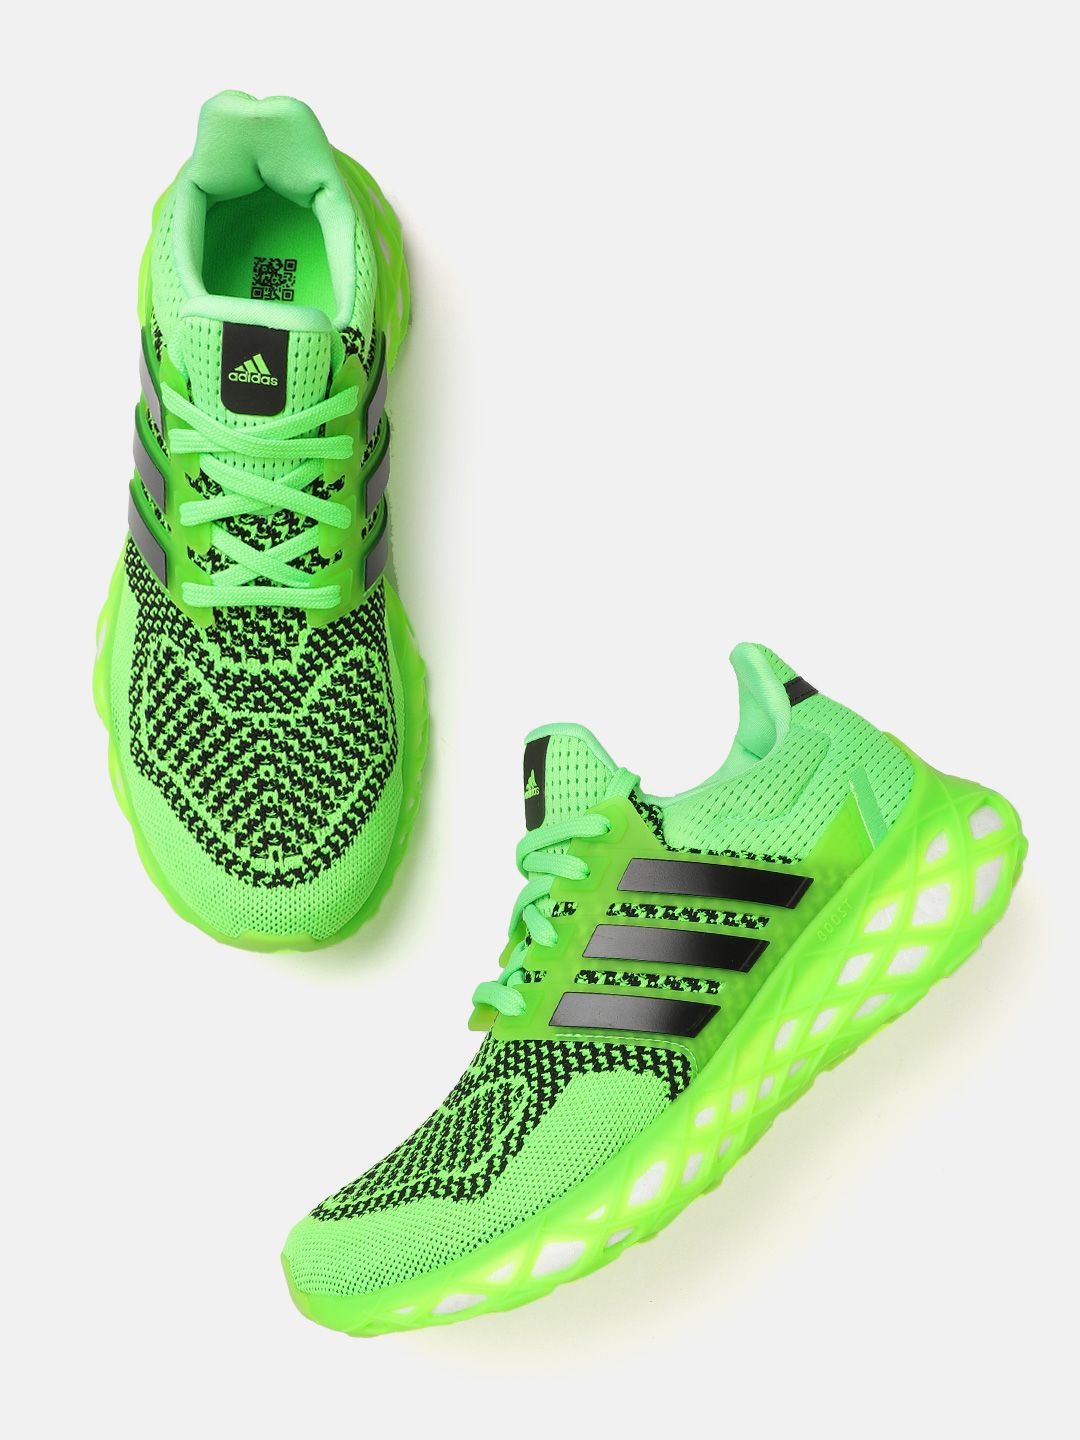 ADIDAS Unisex Fluorescent Green & Black Woven Design Ultraboost Web DNA Running Shoes Price in India